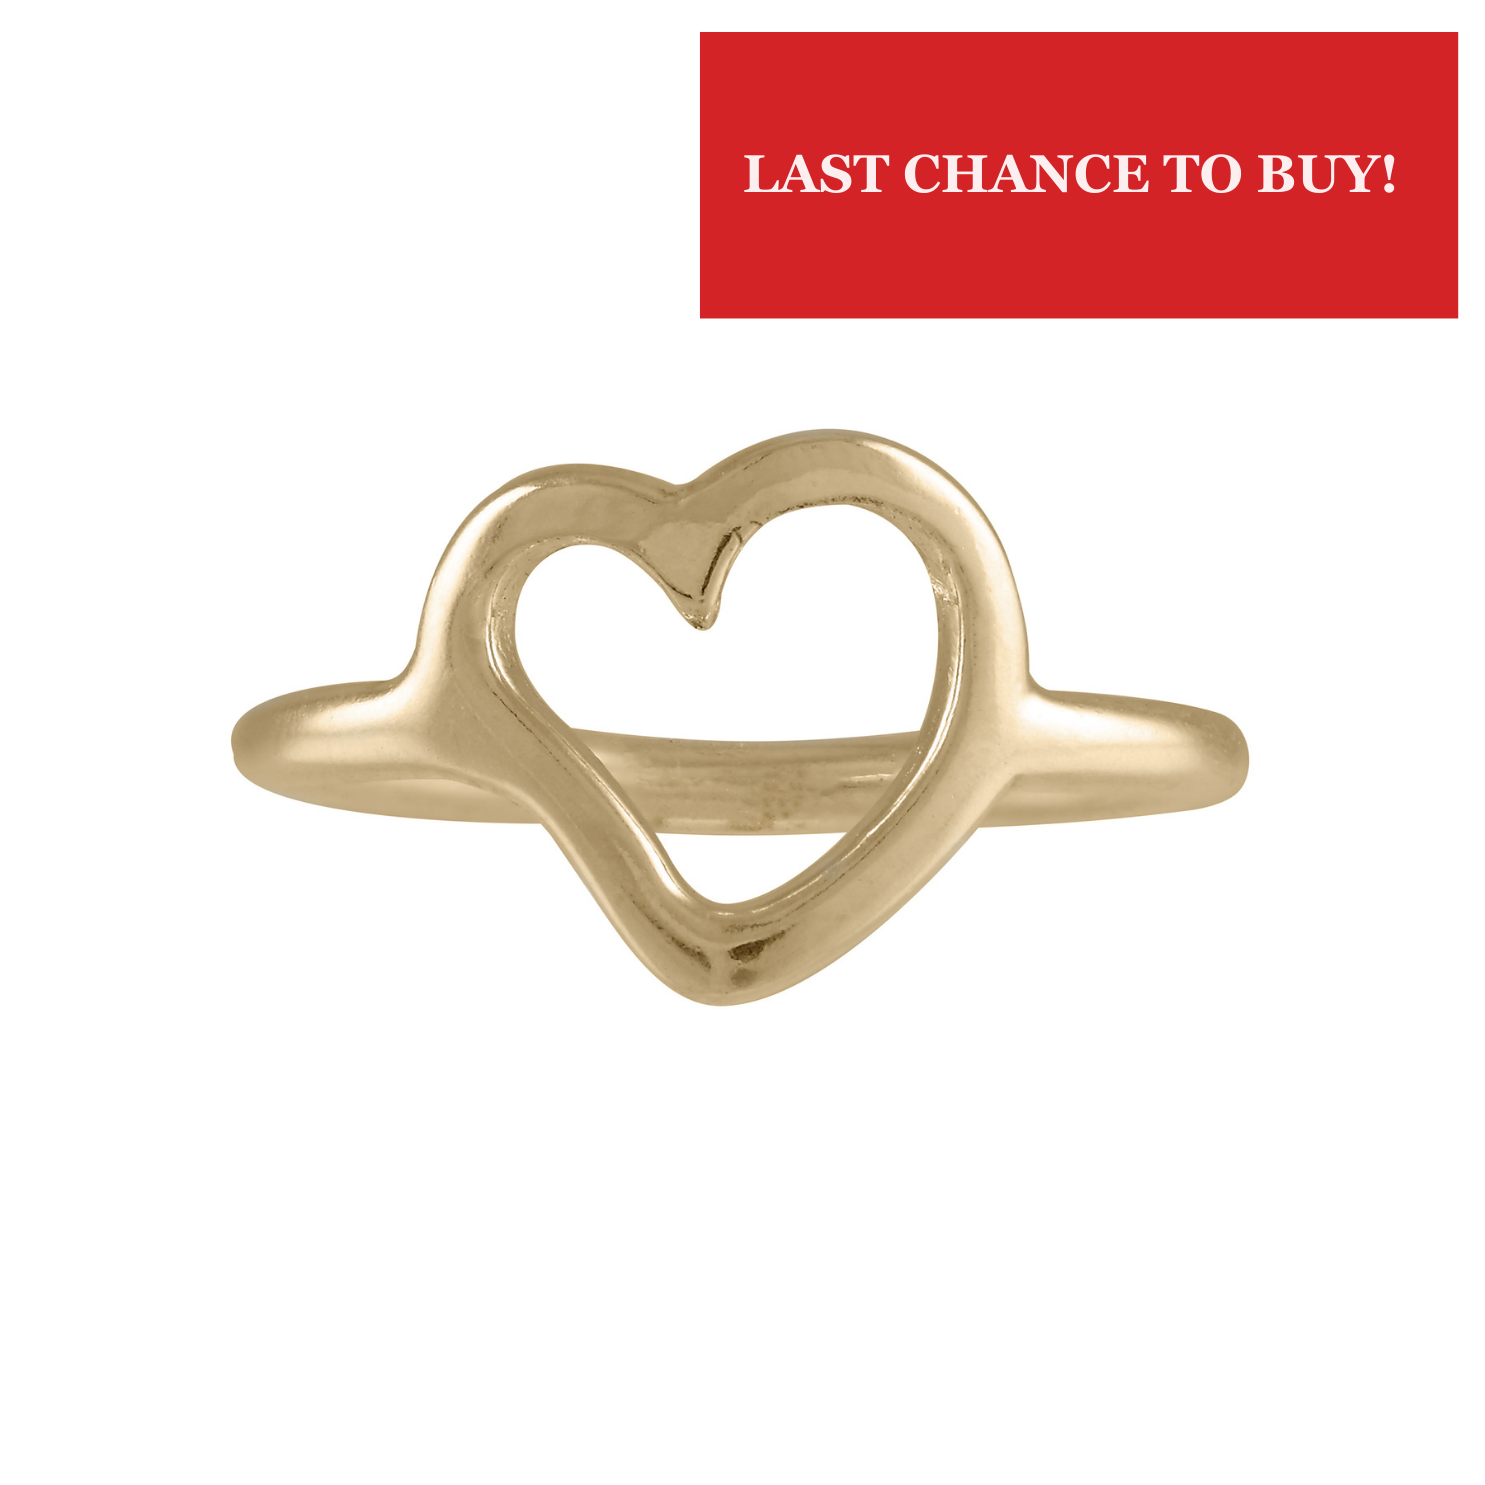 Simply Heart Solid Recycled Gold Ring